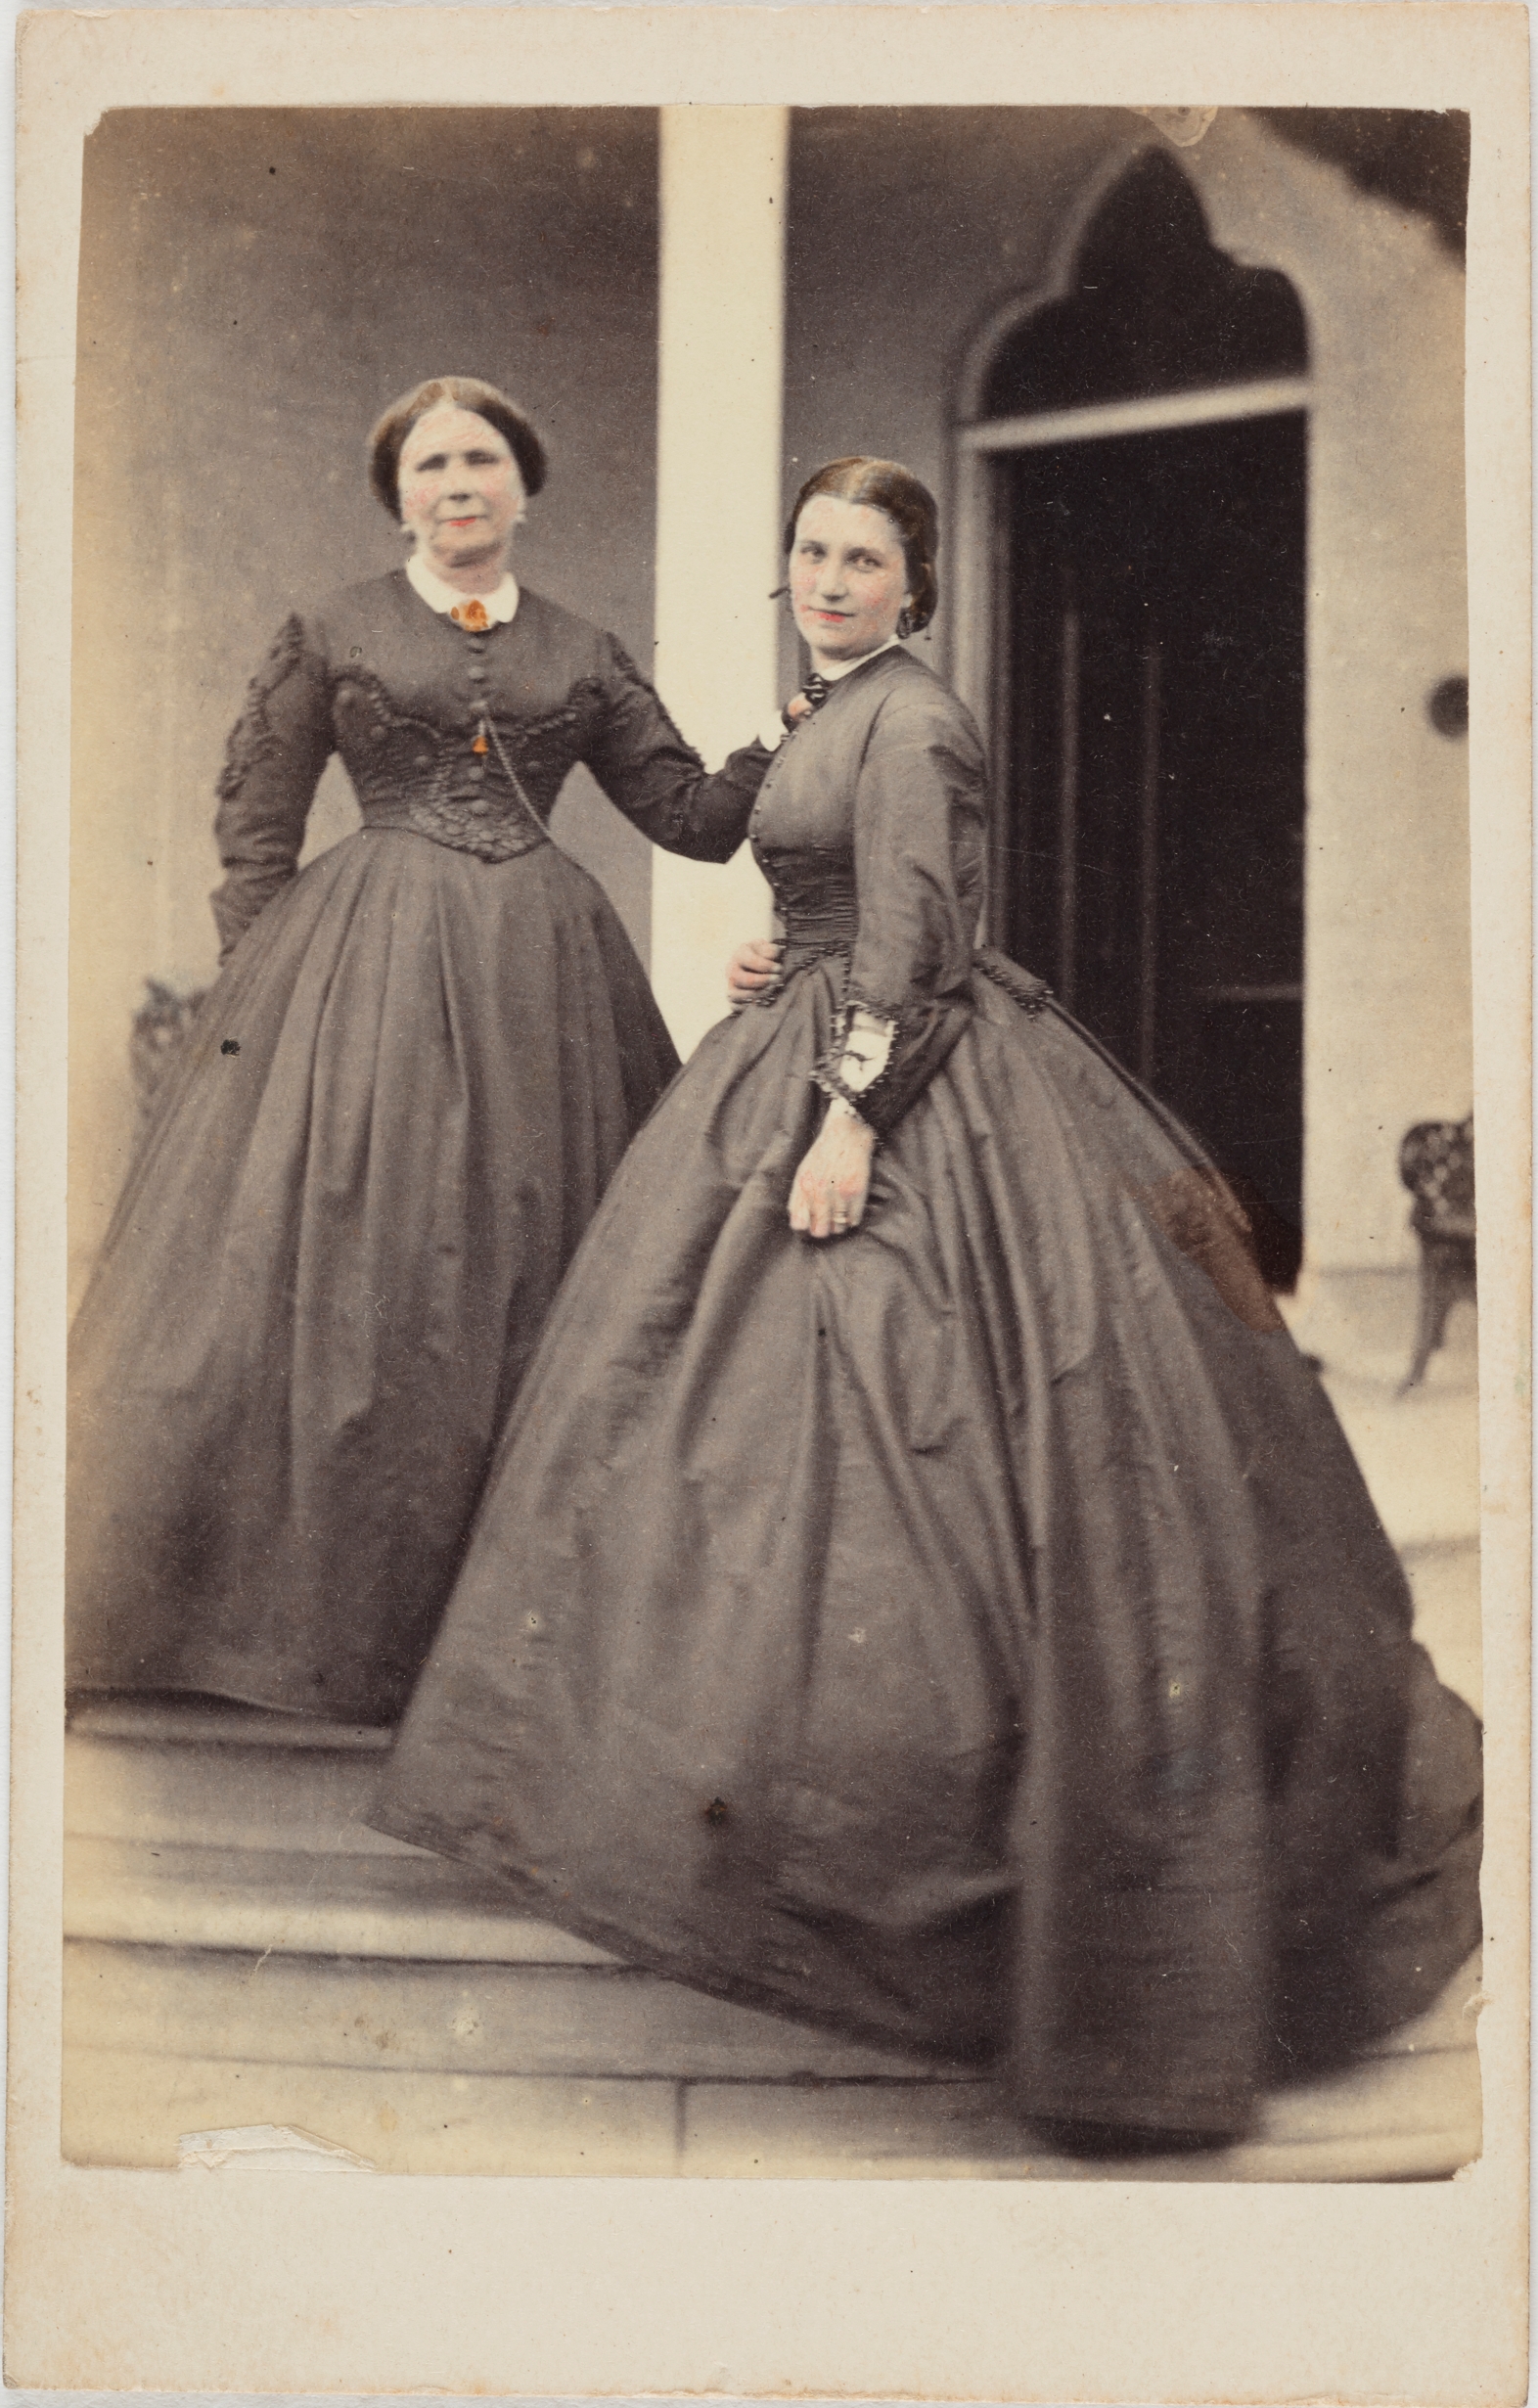 Eleanor Wingate and her daughter-in-law, Jane Emma Terry at Percy Lodge, Potts Point, around 1865 / Thomas Wingate (attrib.)